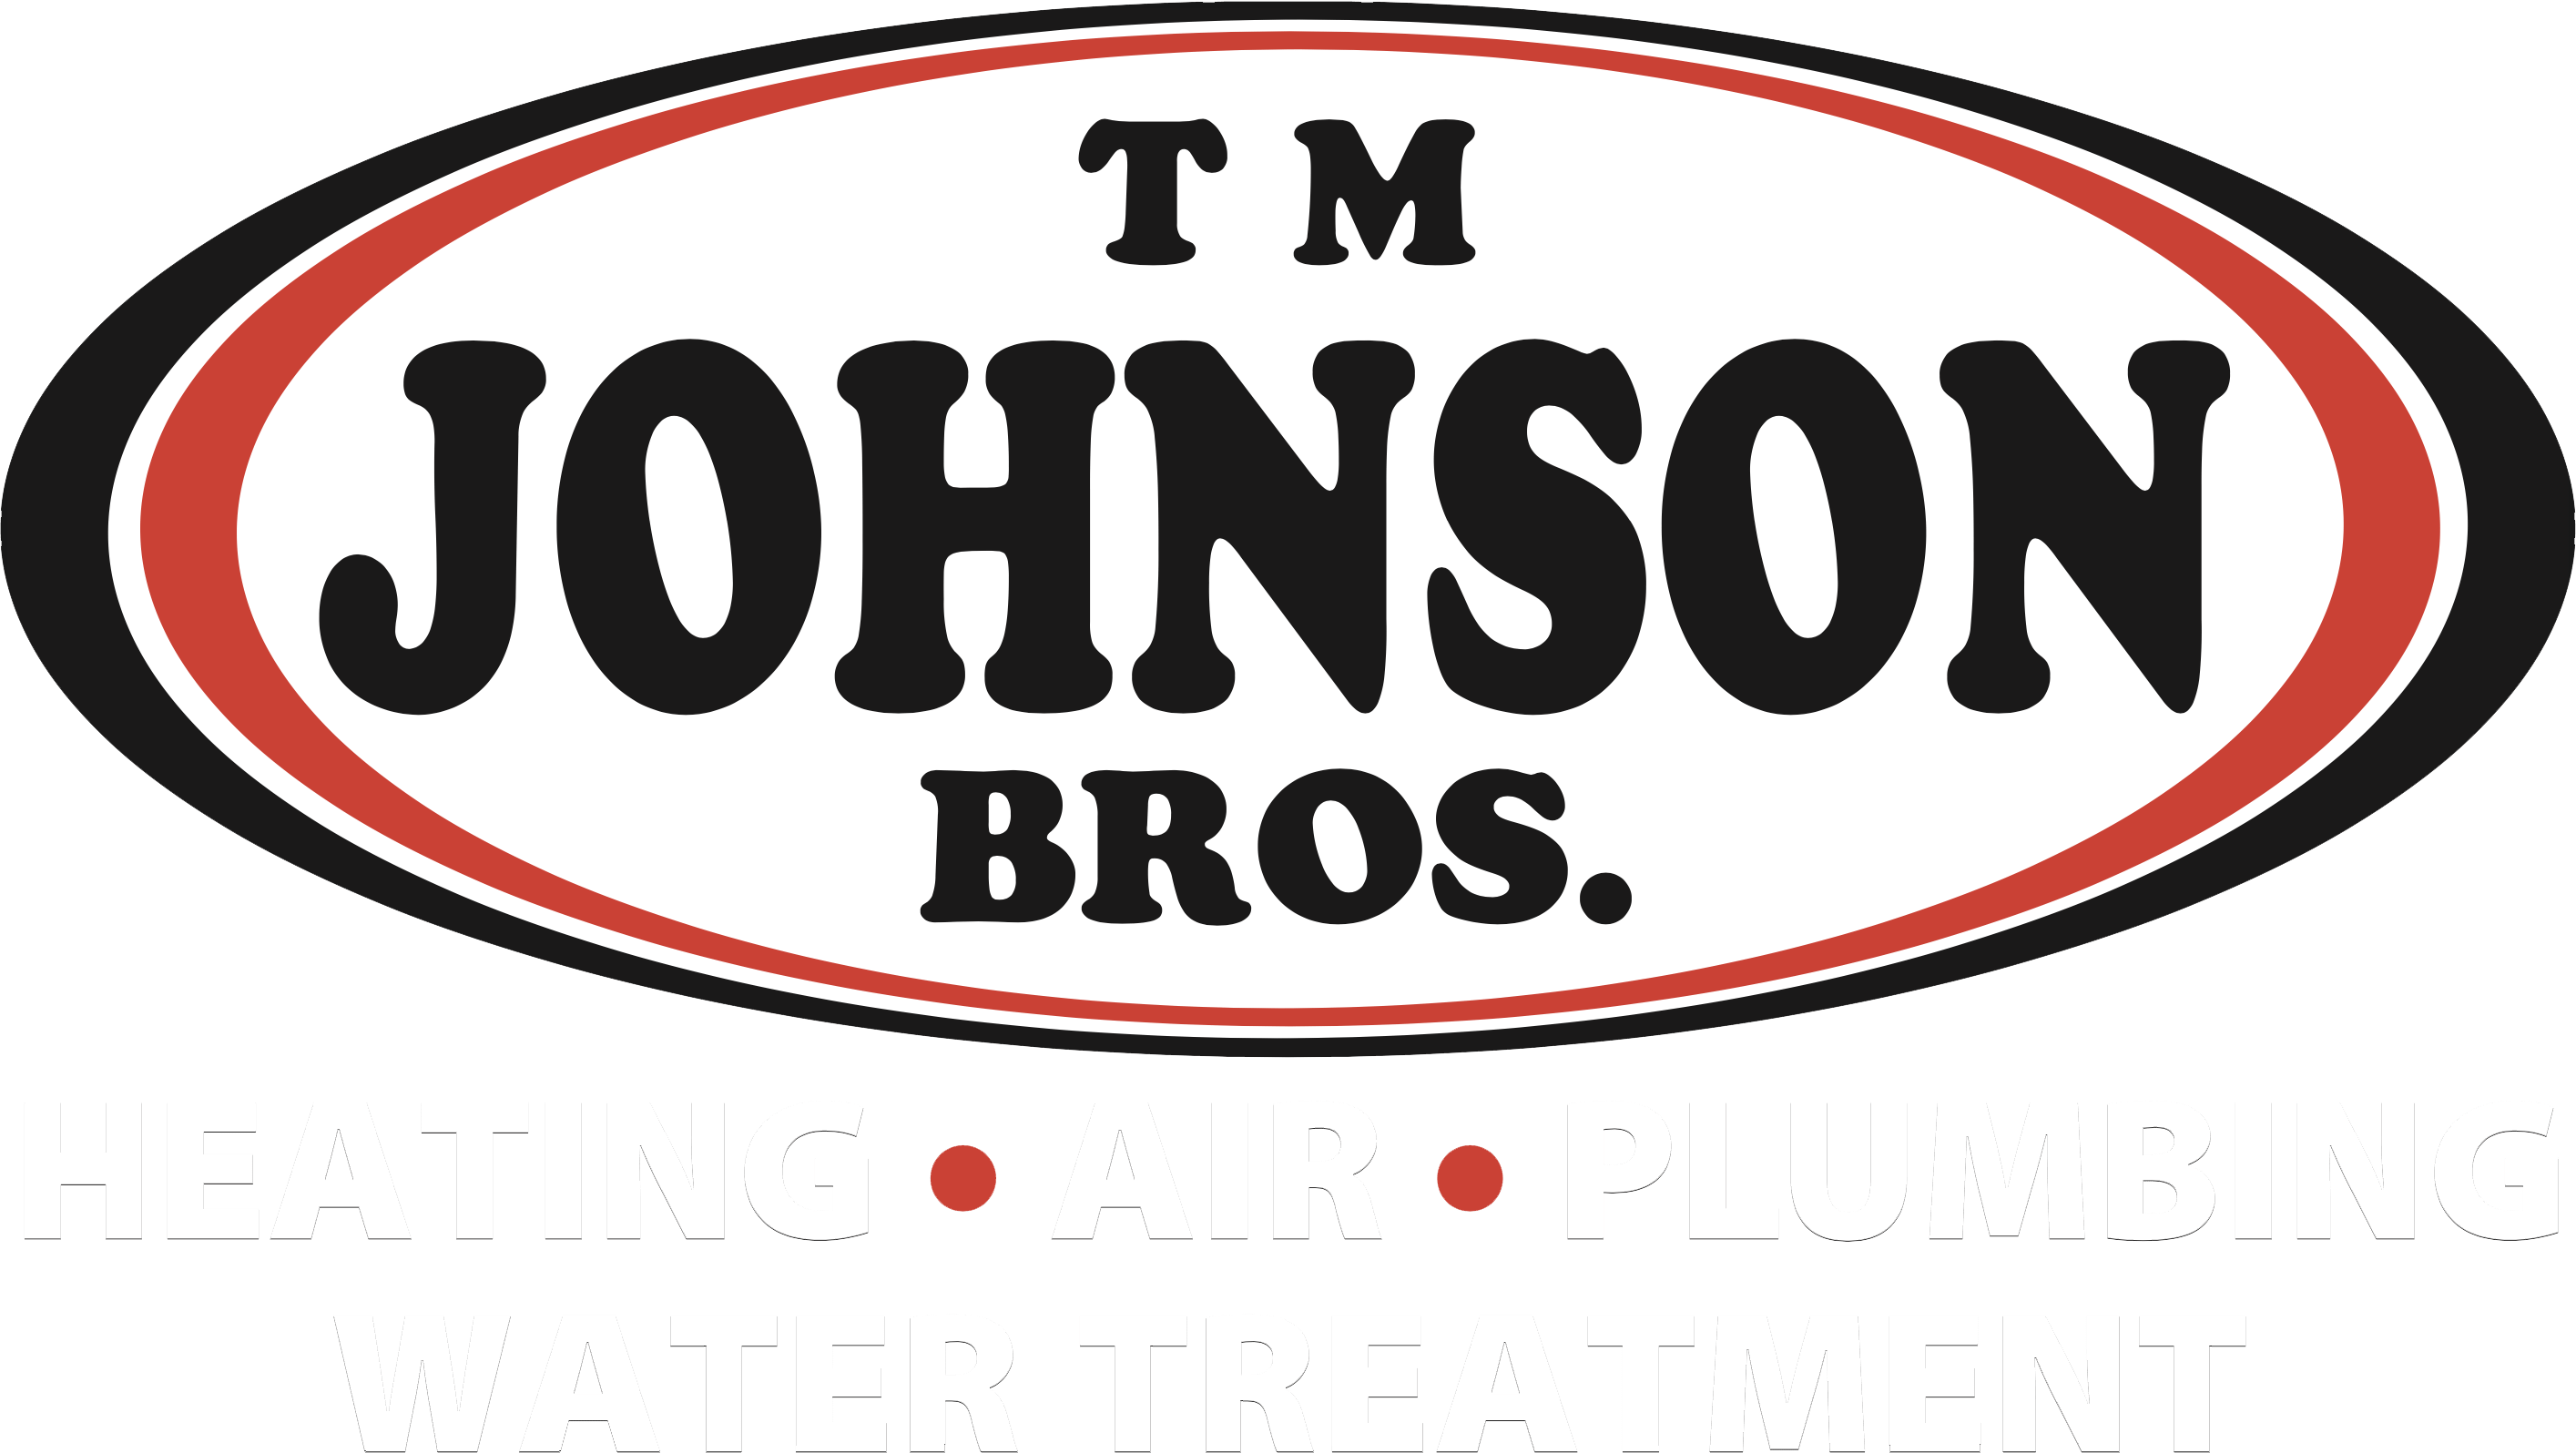 See what makes T M Johnson Bros, Inc. your number one choice for Furnace repair in Isanti MN.